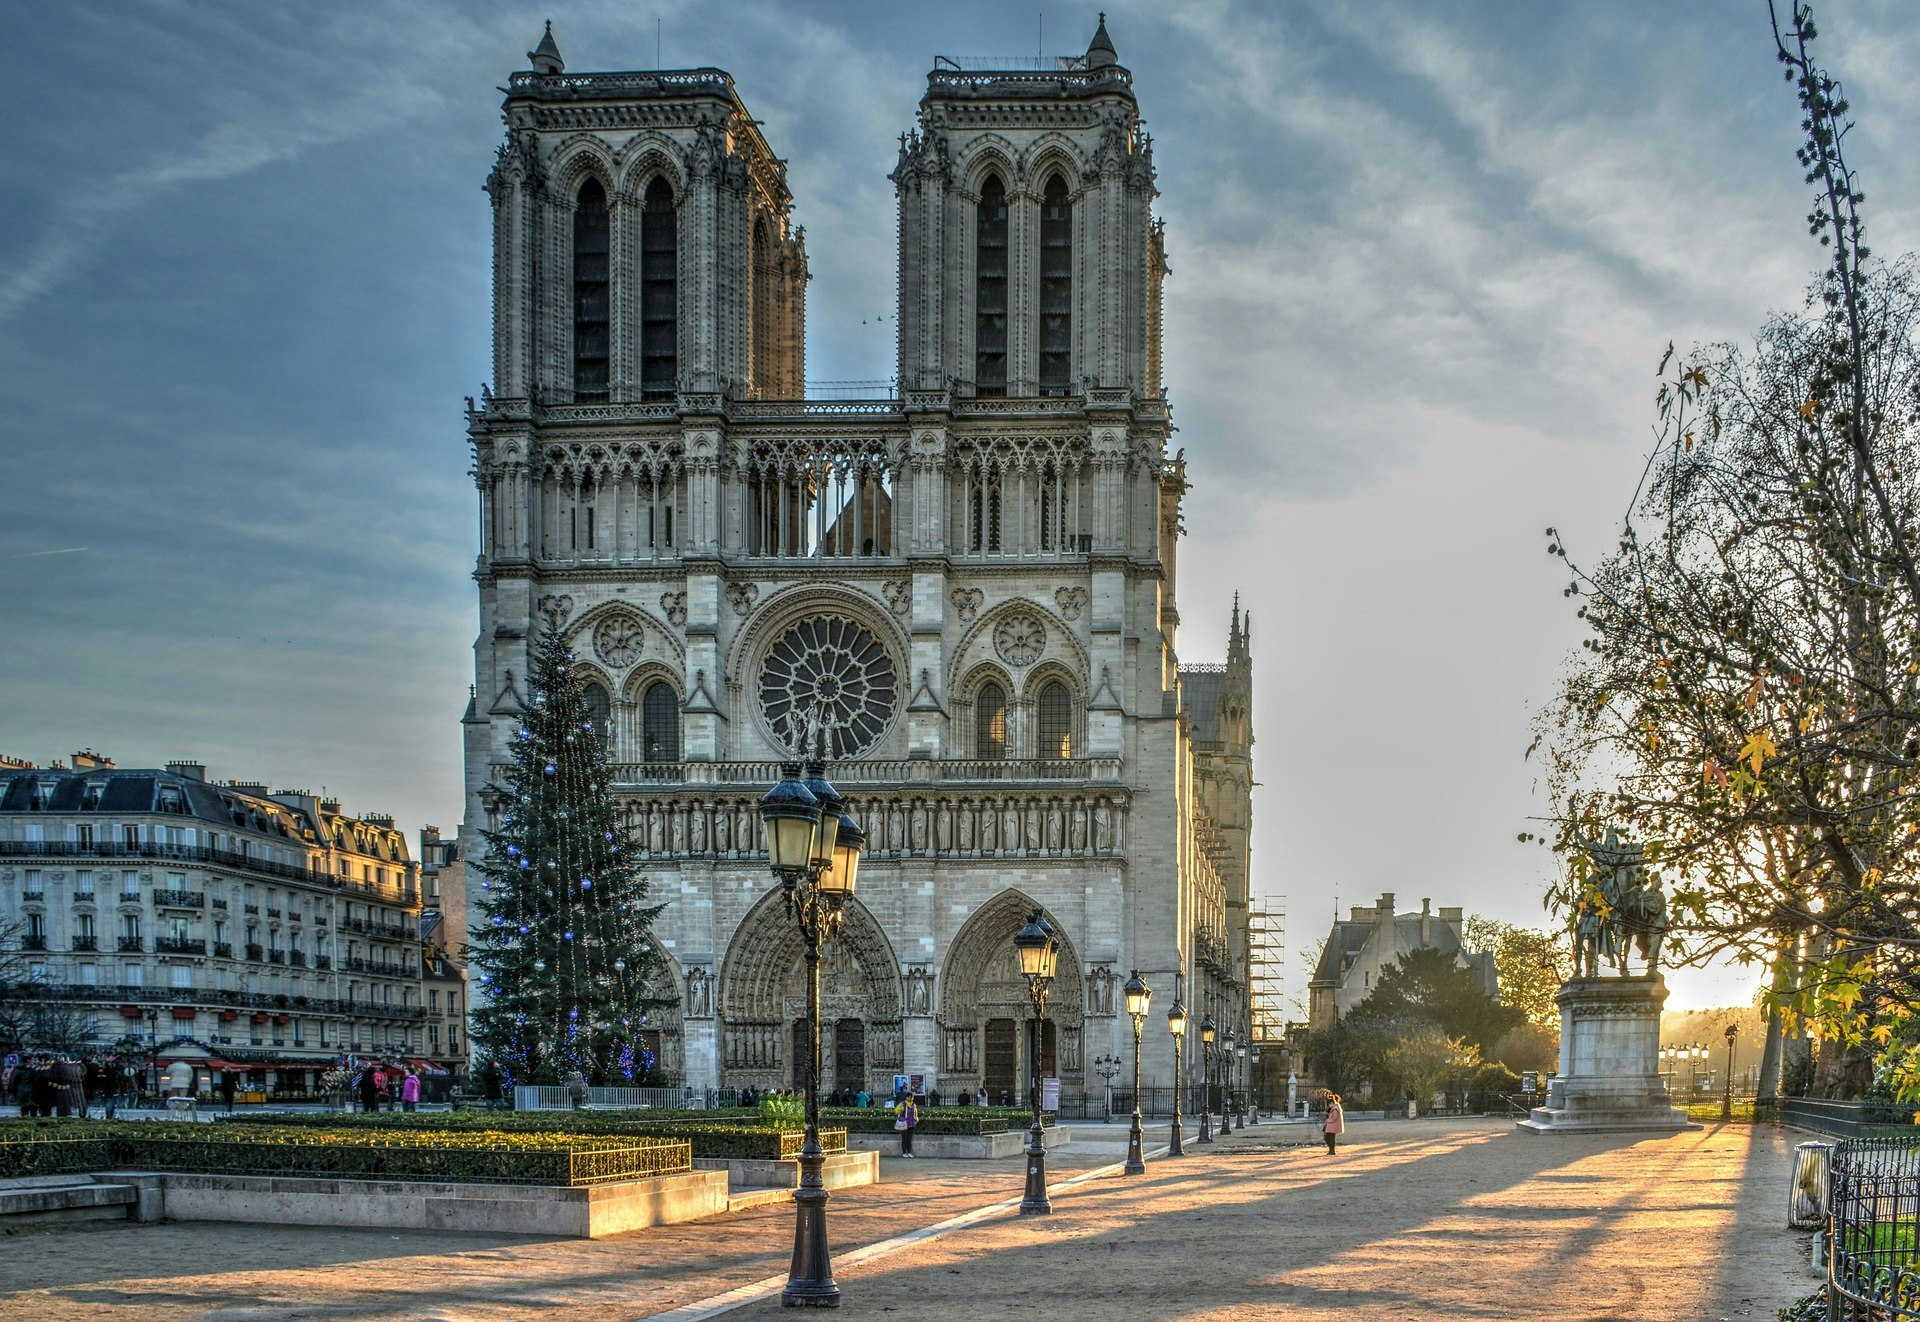 Mysterious Paris: The Order of the Knights Templar